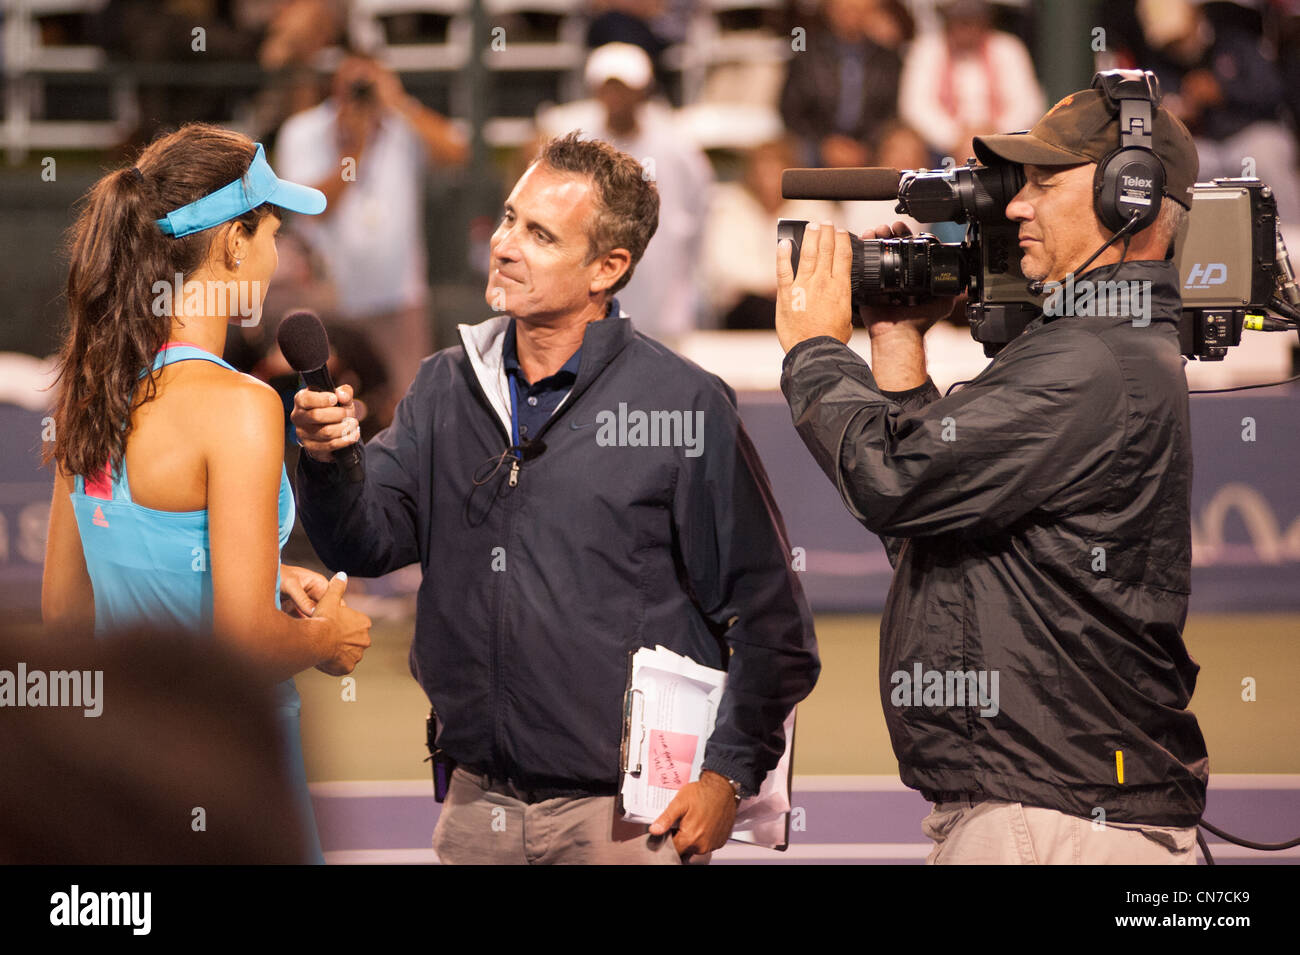 Tennis player, Ana Ivanovic, being interviewed  after her victory at La Costa Resort. Stock Photo